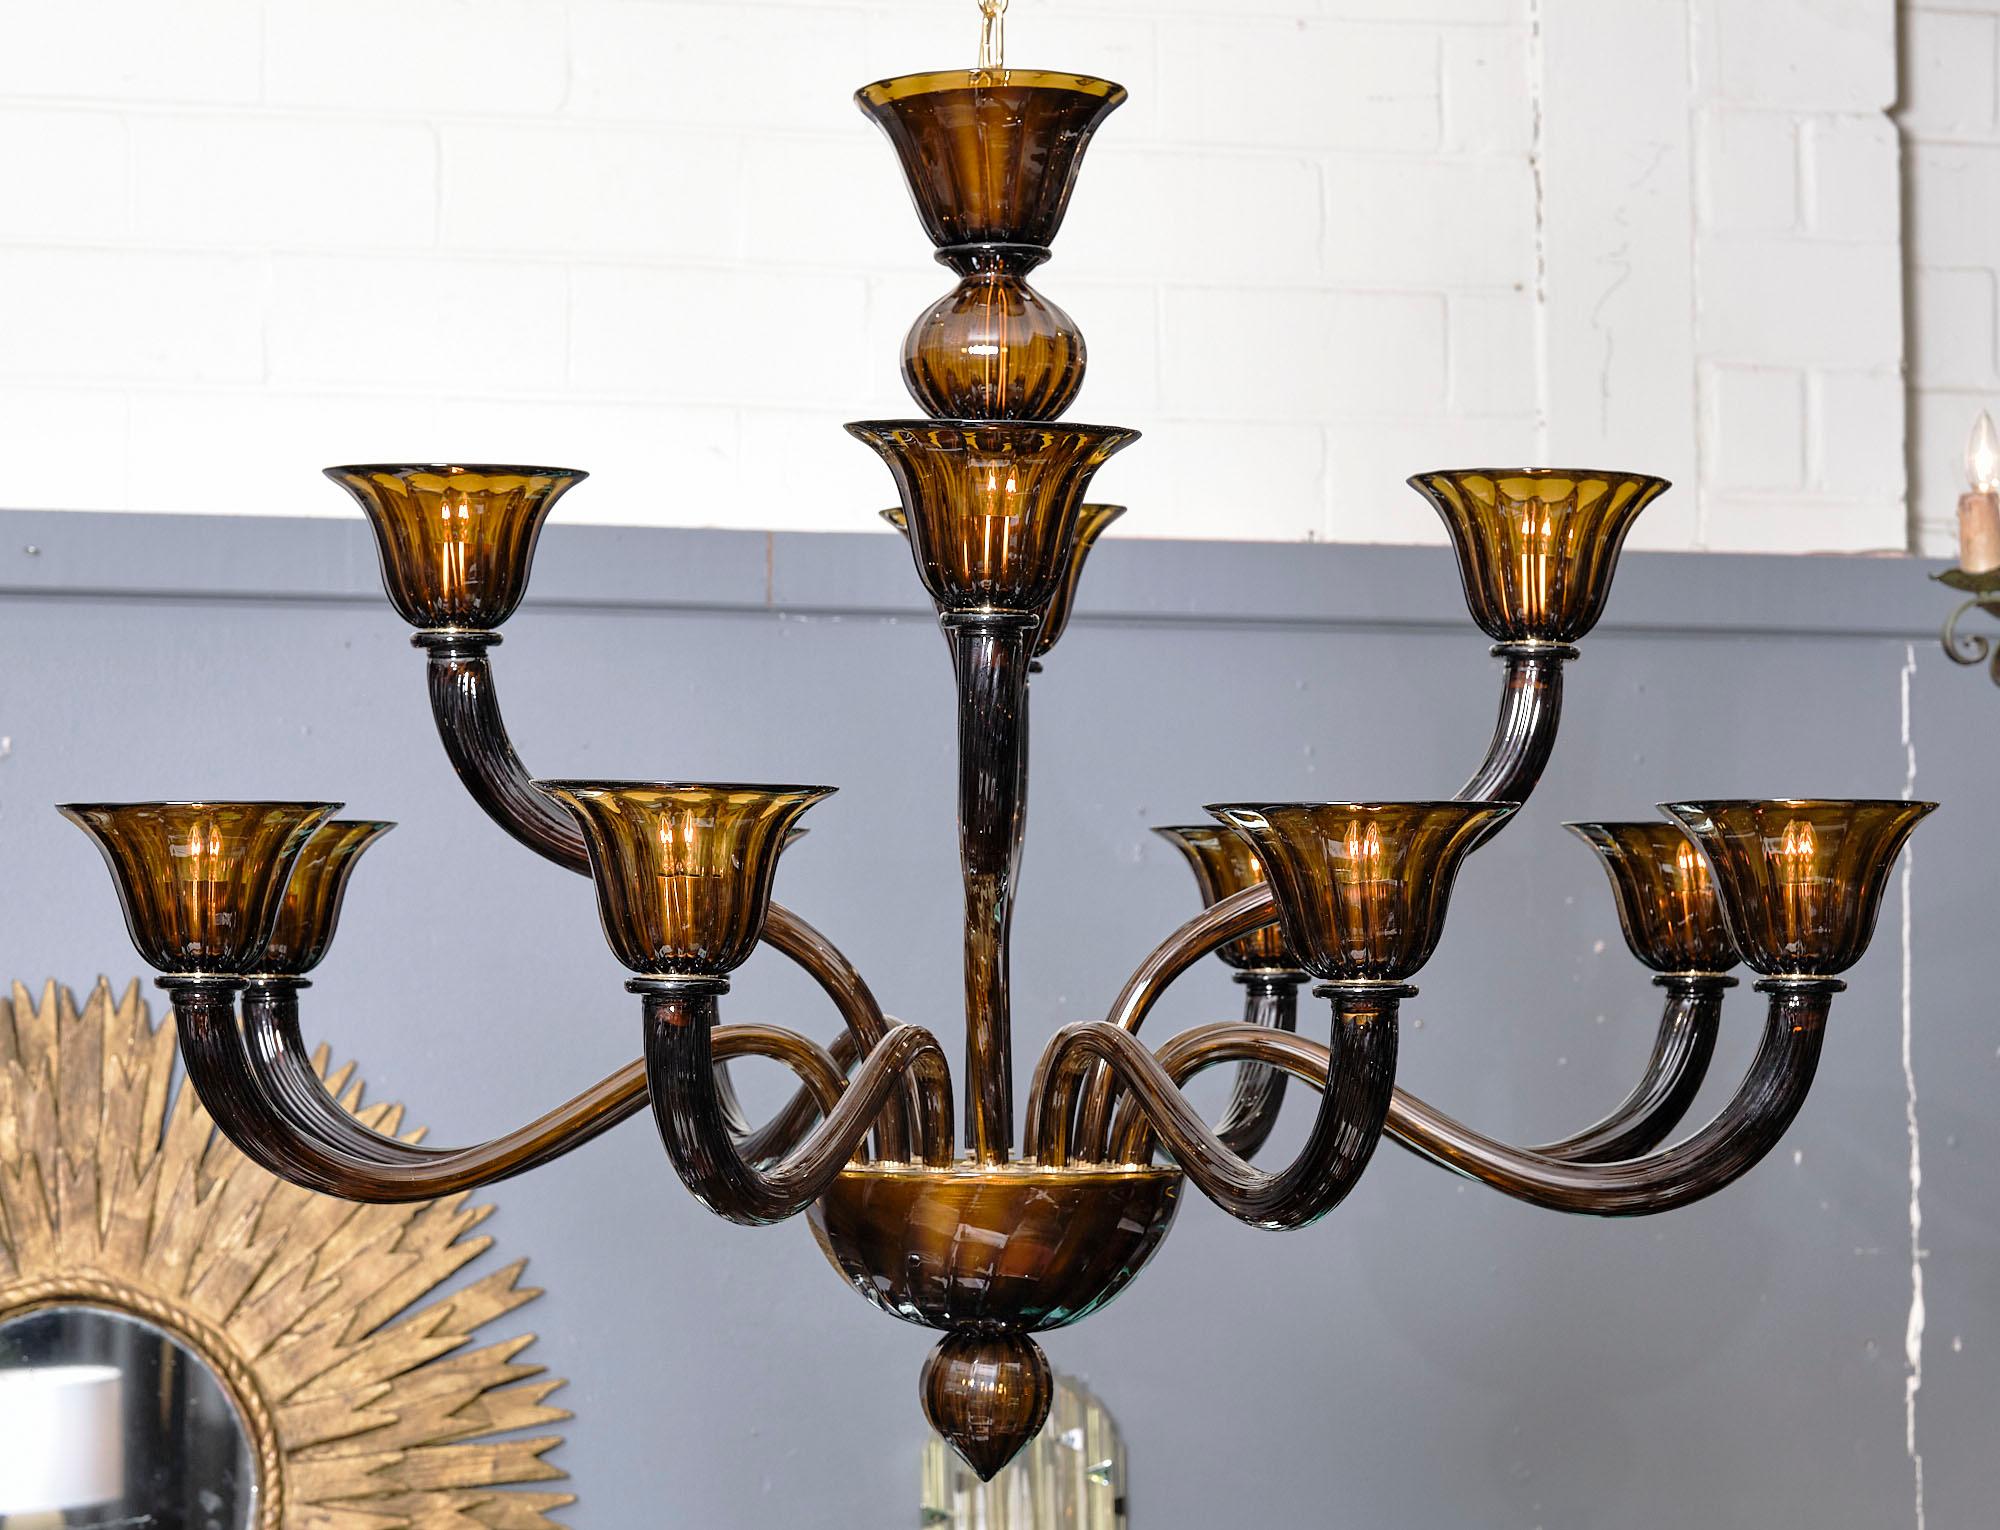 Chandelier from the island of Murano made of all original hand-blown glass in tobacco colored glass. There are 12 branches and this piece has been newly wired to fit US standards. The overall height is currently 57